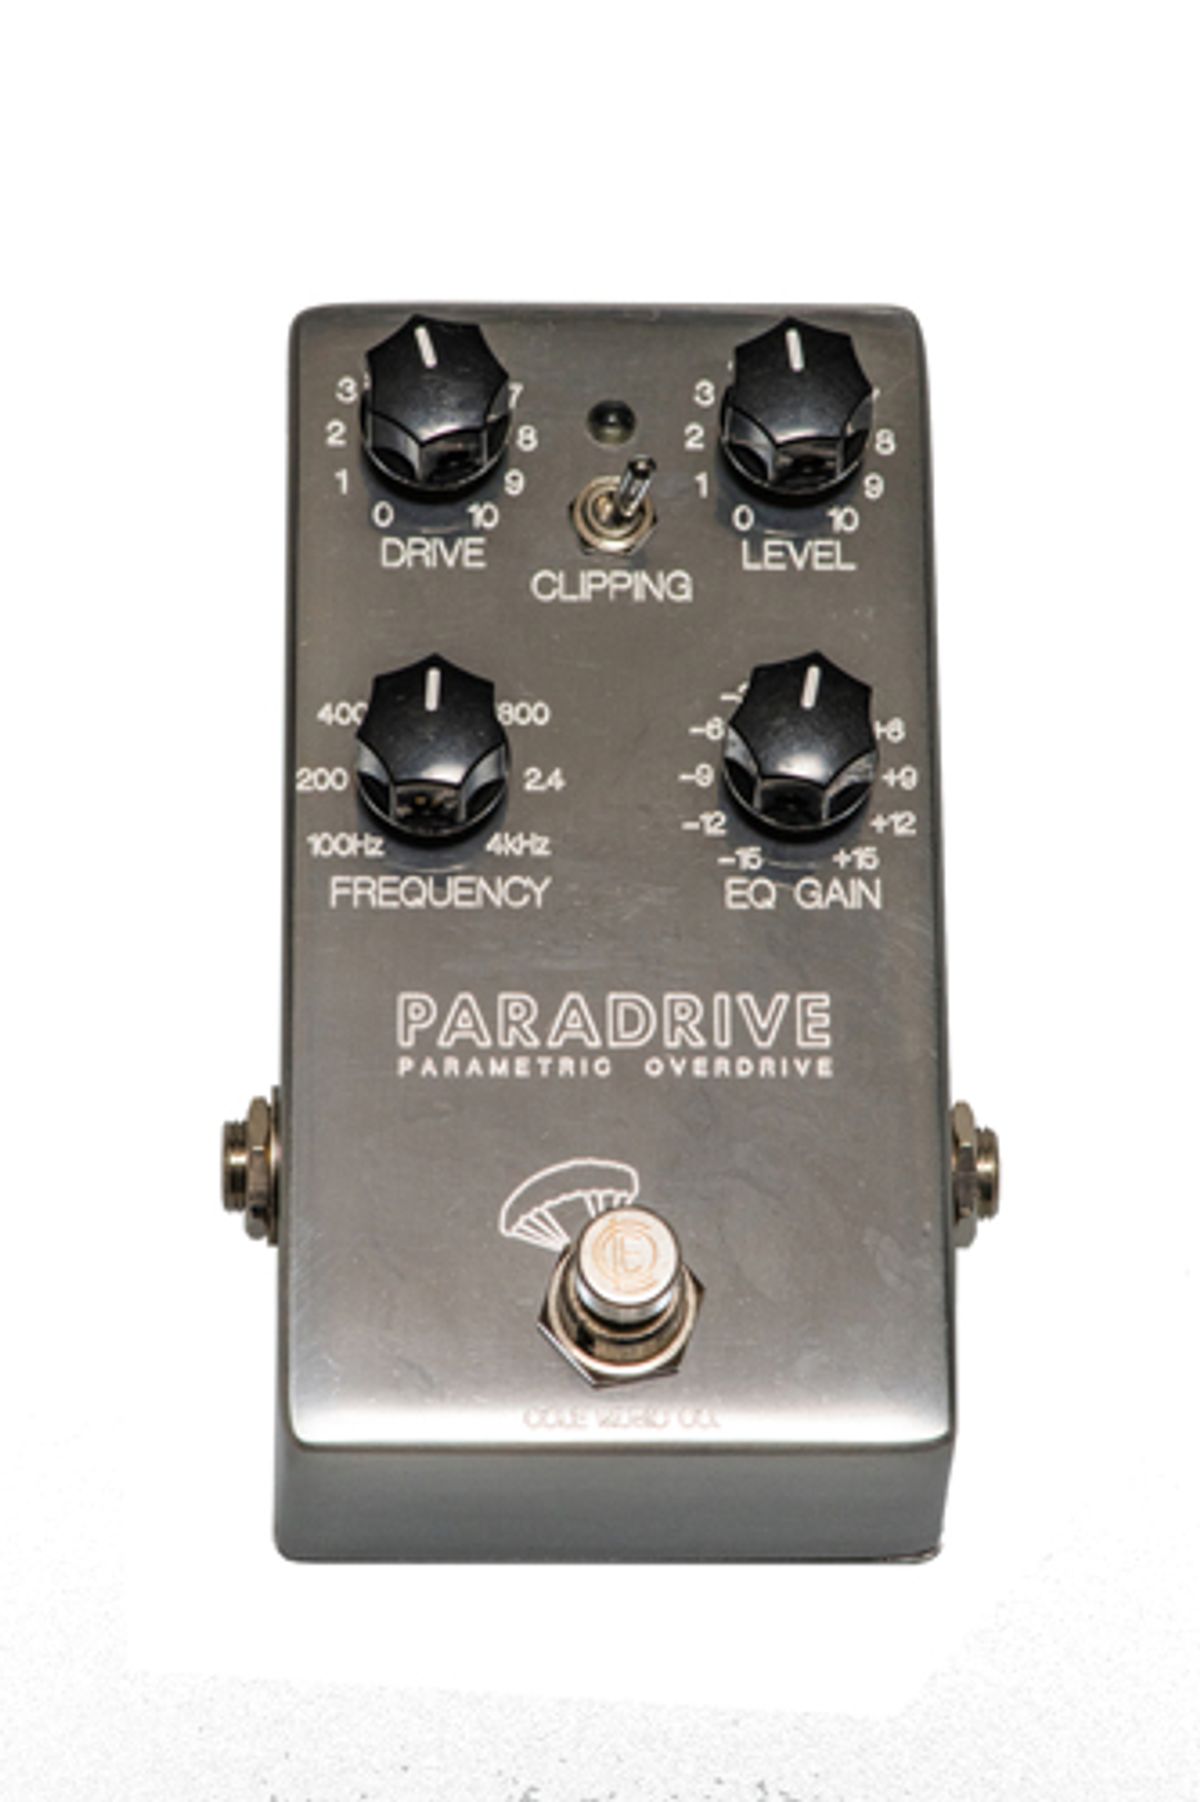 Cole Music Releases the Paradrive Parametric Overdrive